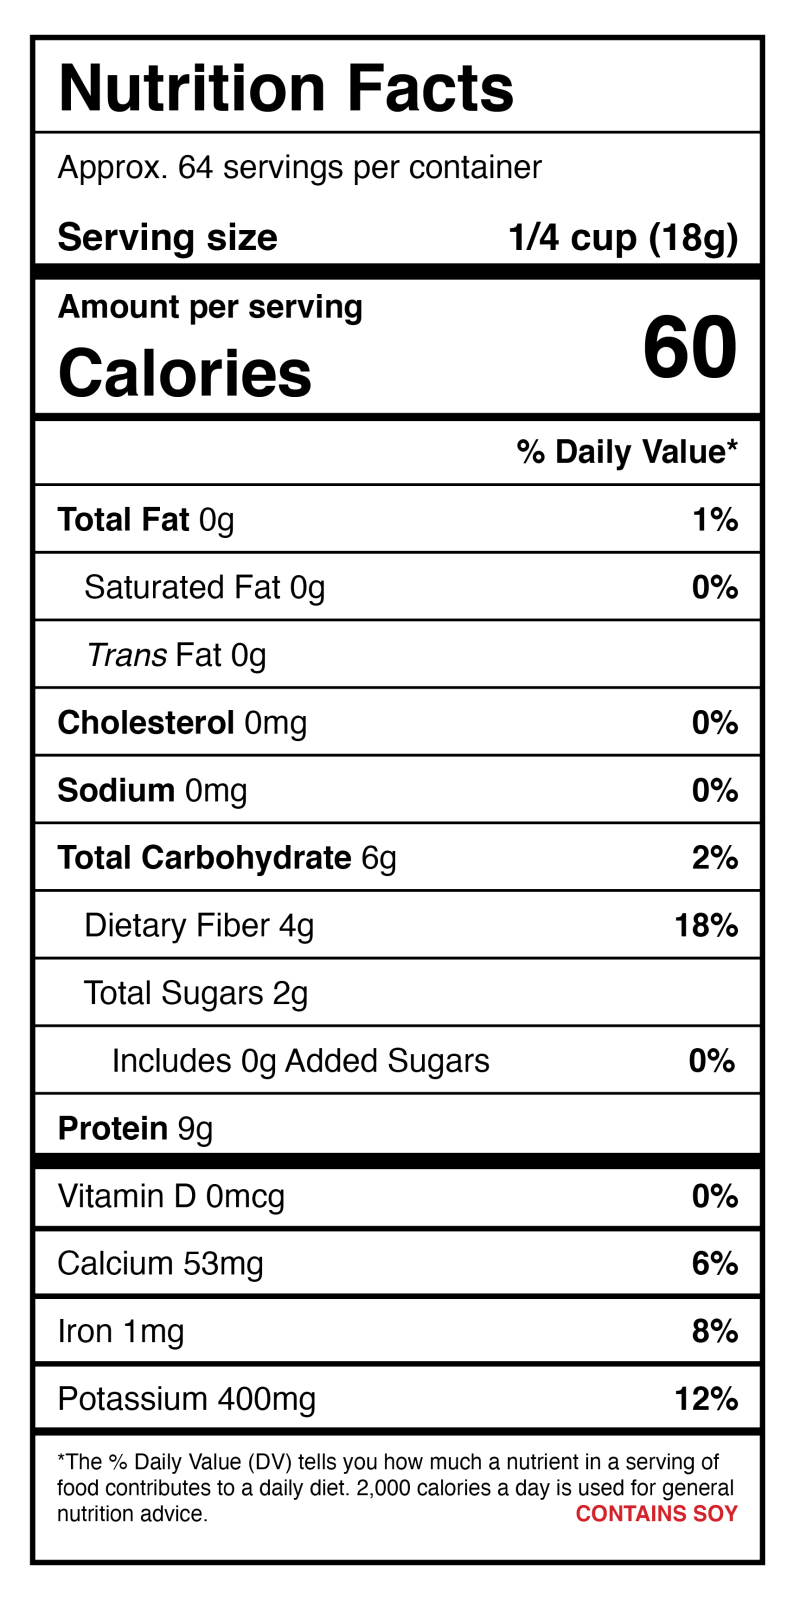 Textured Soy Protein (Unflavored) (42 Oz)